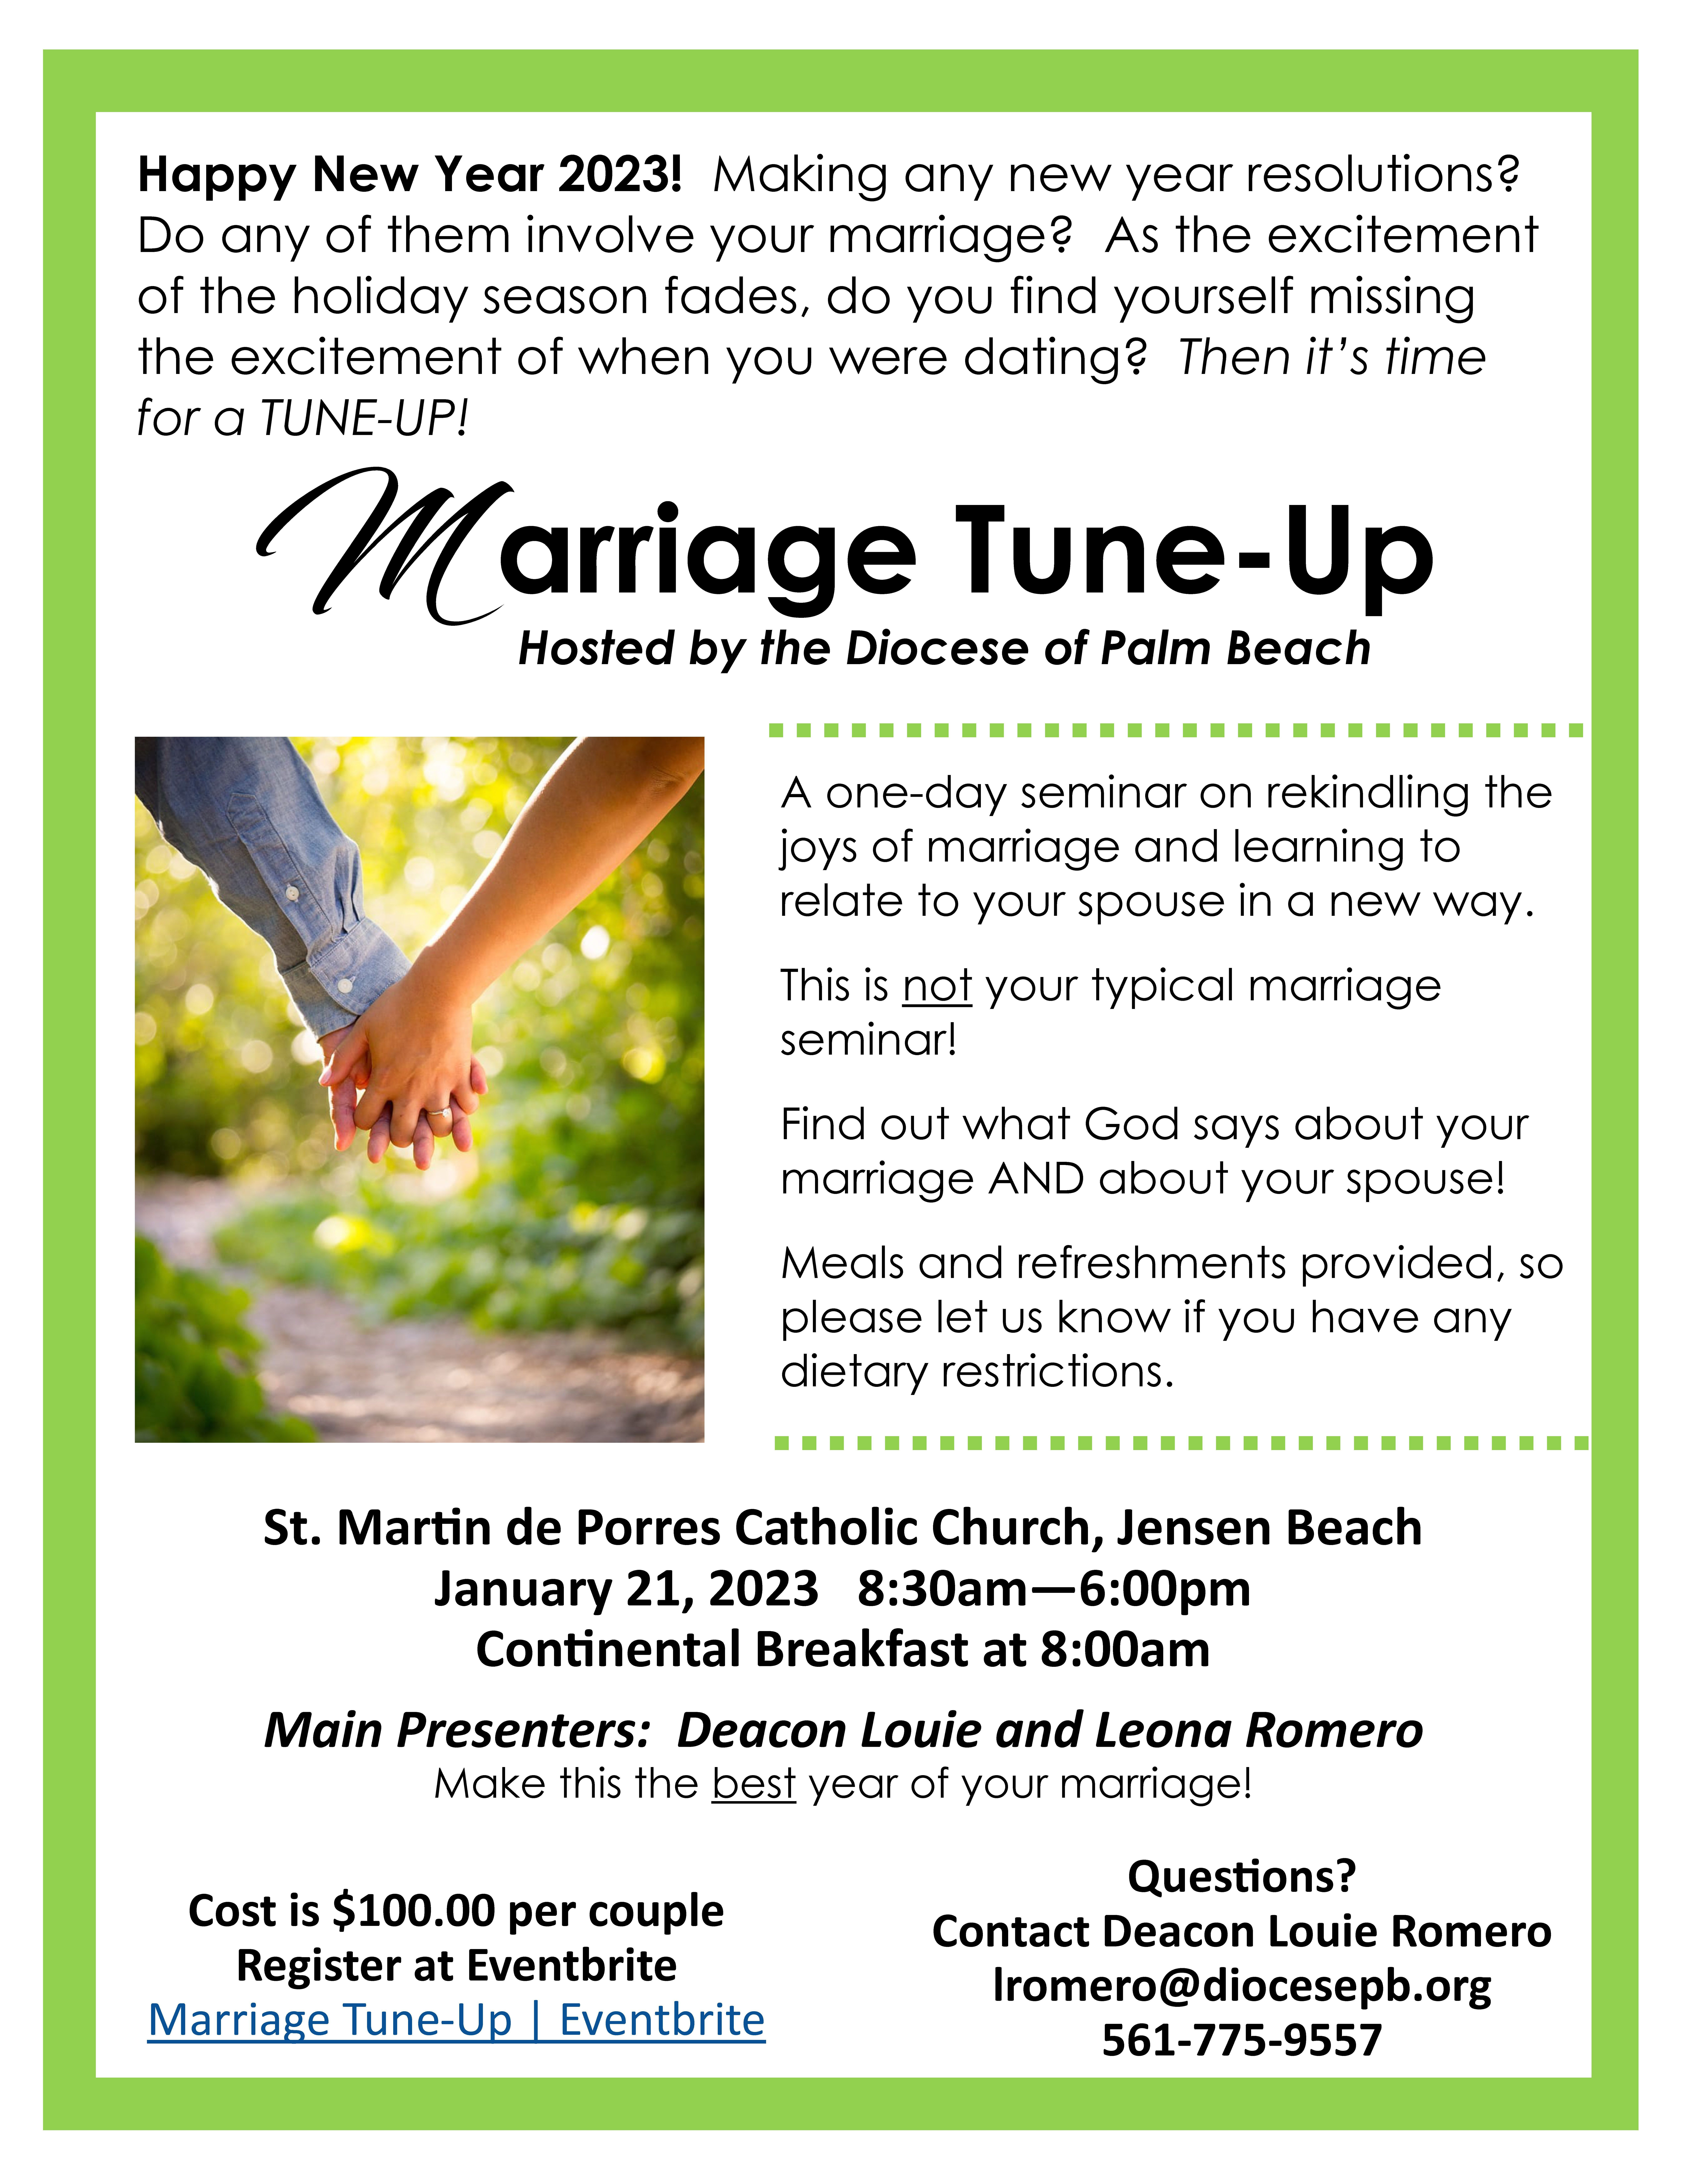 Register for a Marriage Tune-up on January 21